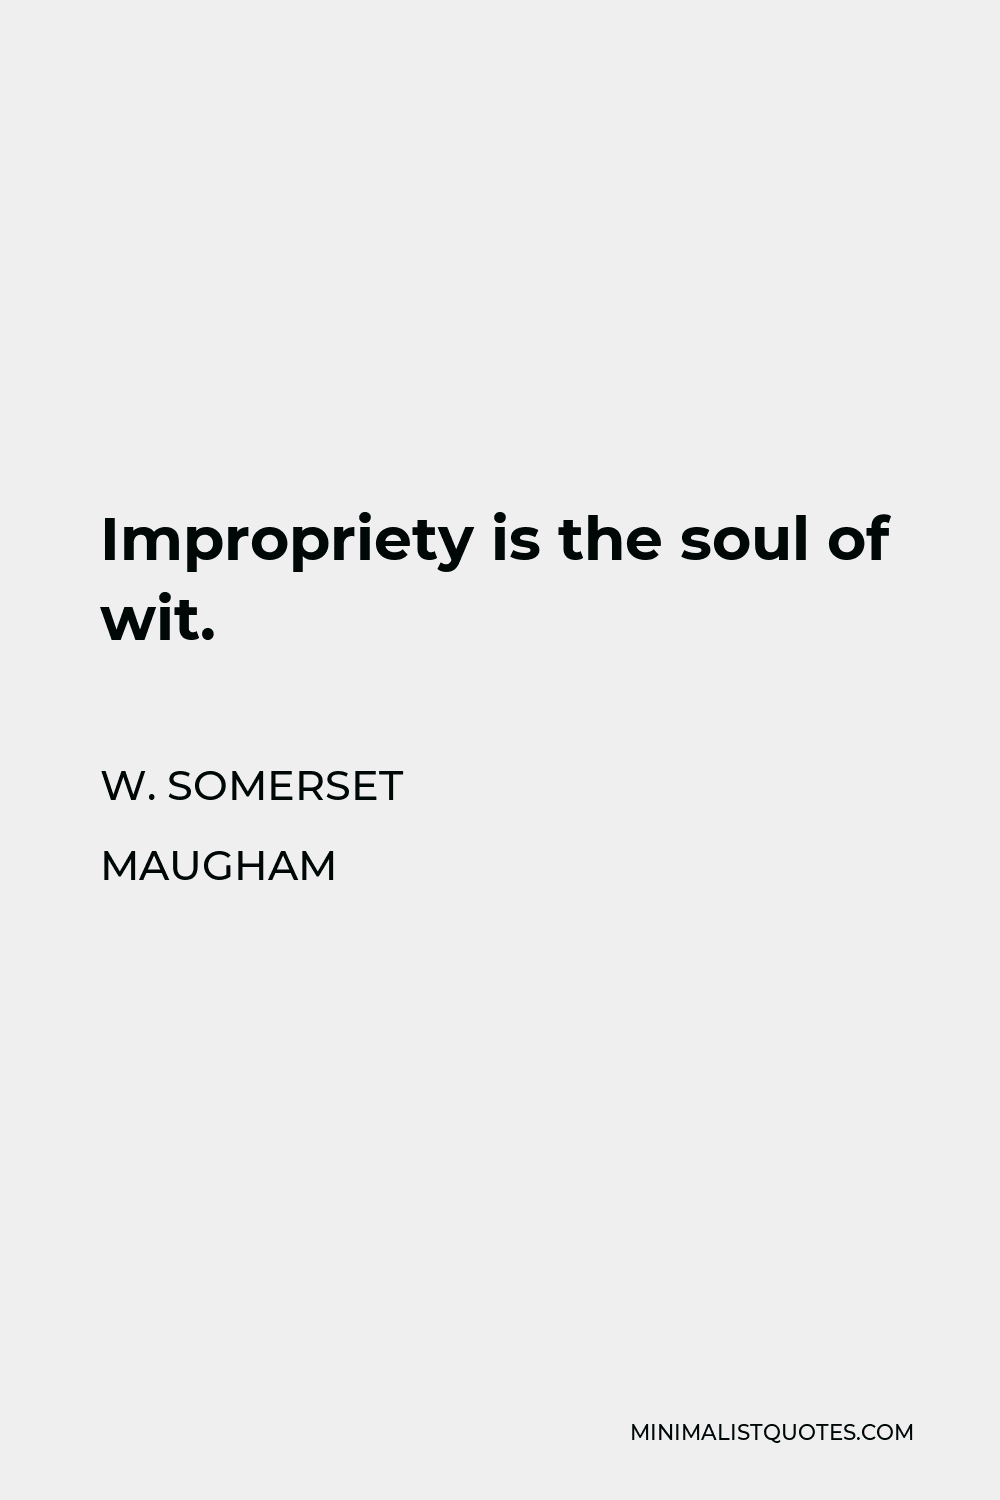 W. Somerset Maugham Quote - Impropriety is the soul of wit.